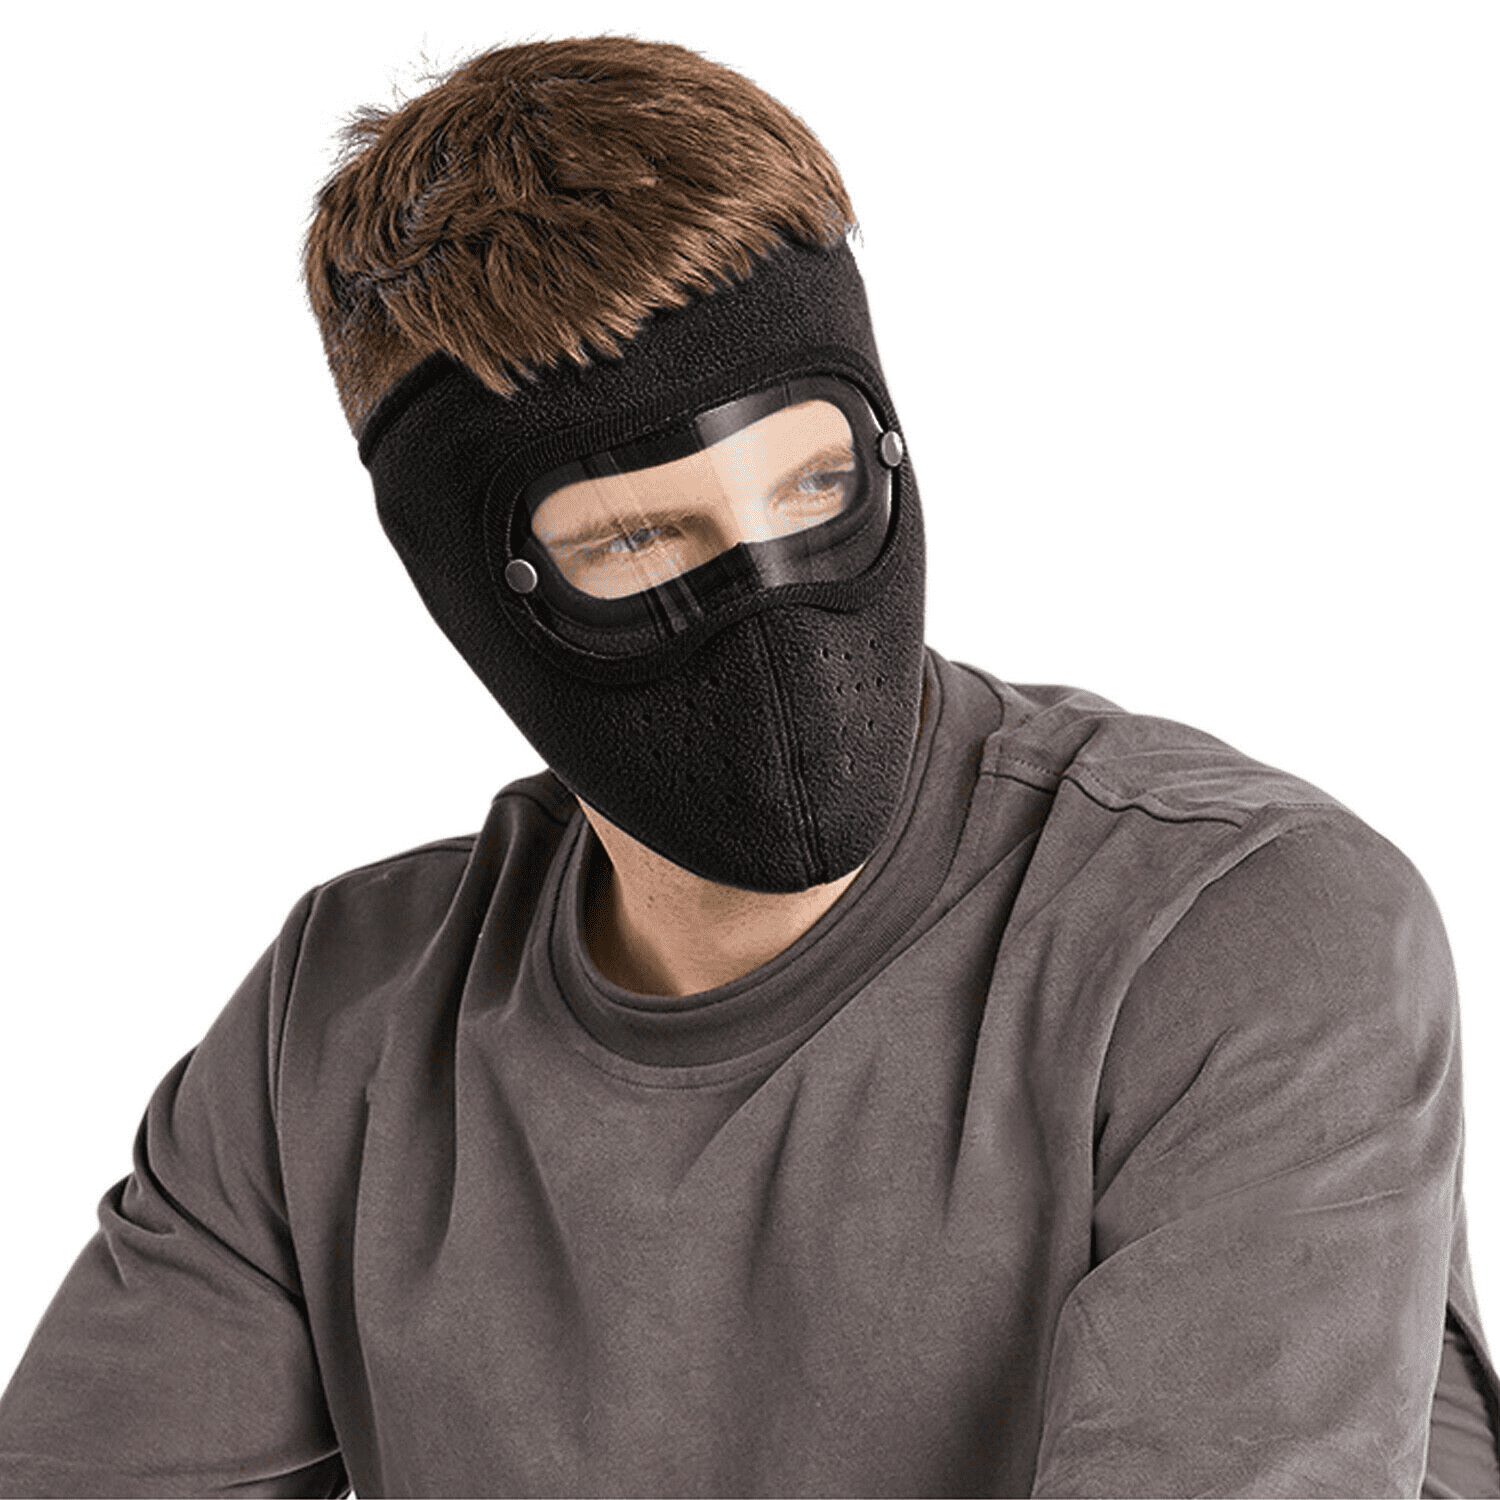 Ultimate Protection from The Elements Fishing & Camping Balaclava Face Mask Cold Weather Ski Mask for Men Windproof Winter Snow Gear For Hunting Hunter Orange 